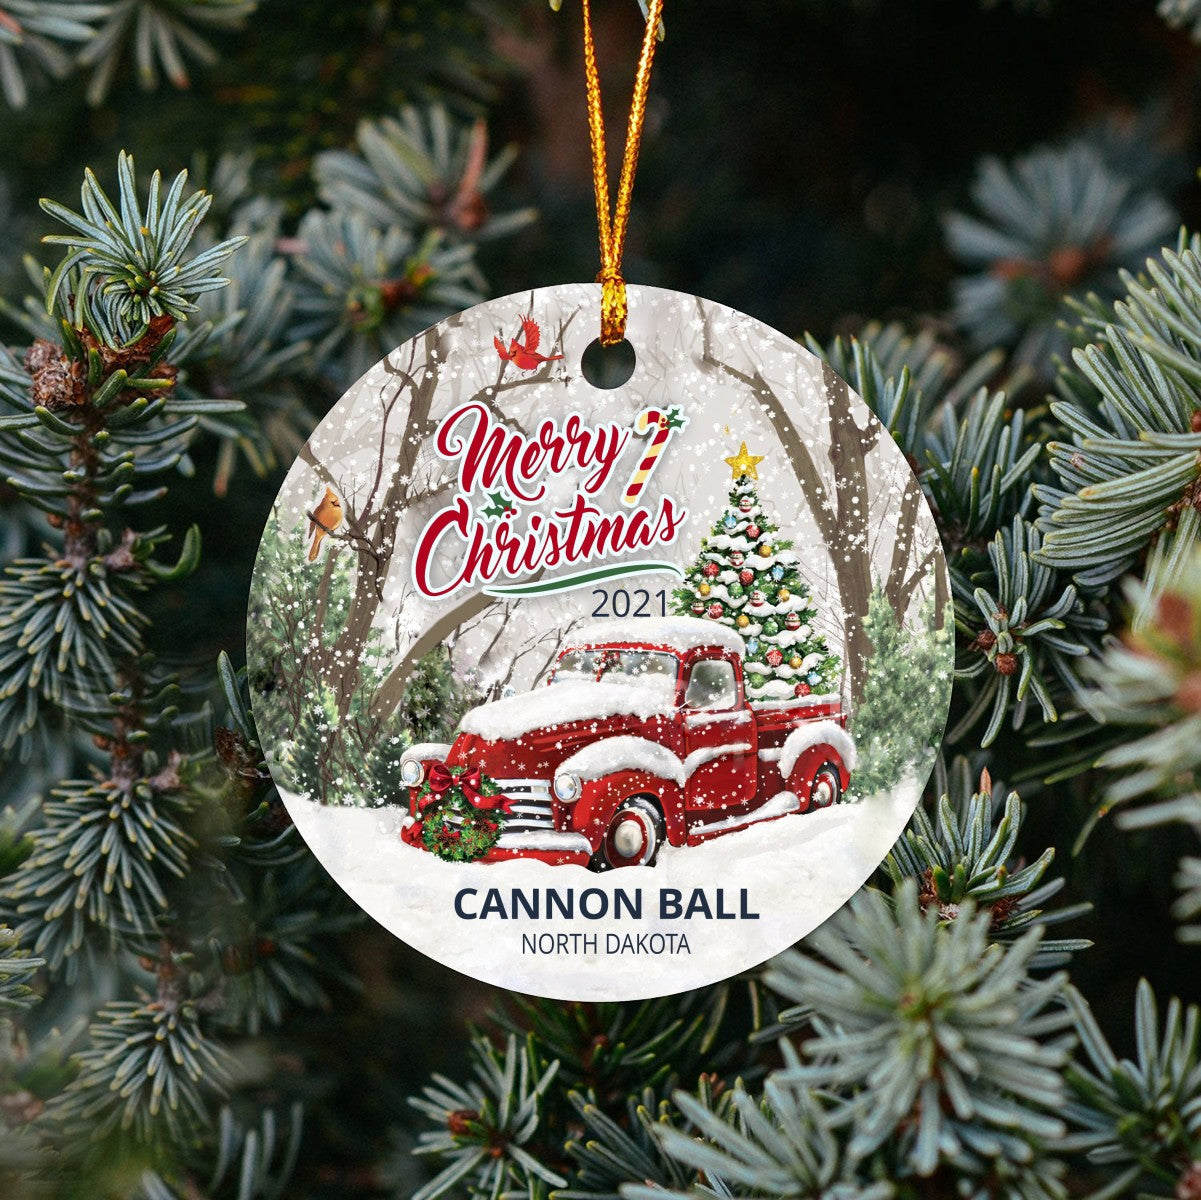 Christmas Tree Ornaments Cannon Ball - Ornament With Name City, State Cannon Ball North Dakota ND Ornament - Red Truck Xmas Ornaments 3'' Plastic Gift For Family, Friend And Housewarming